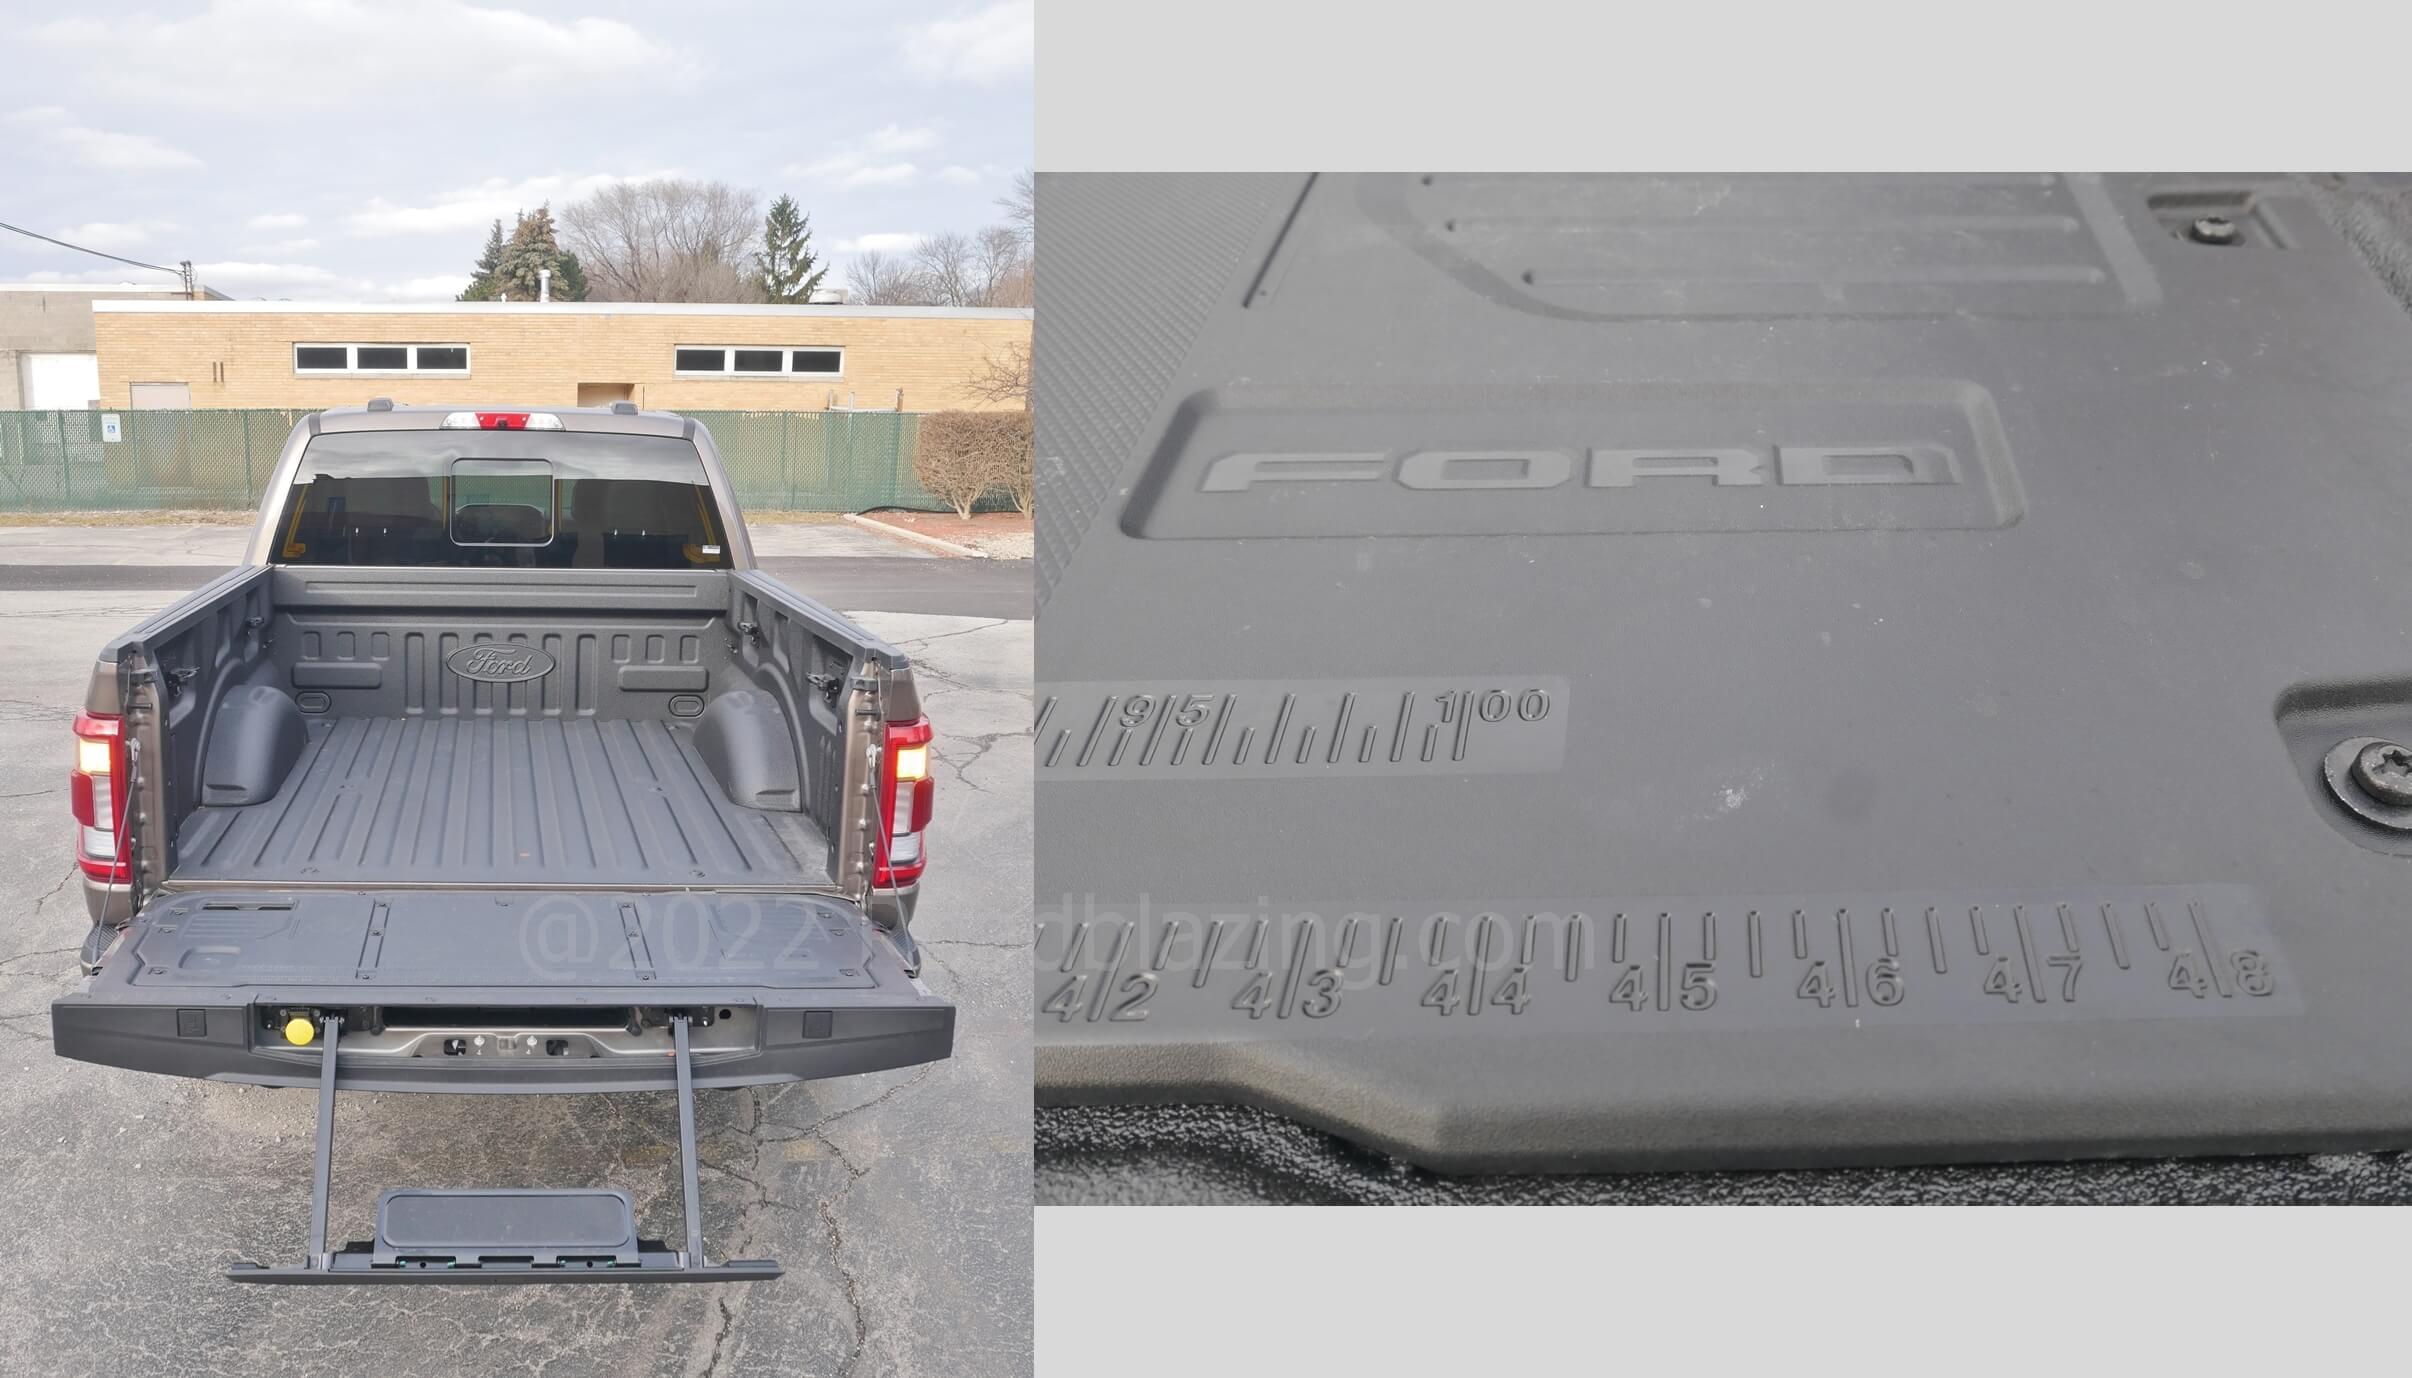 2021 Ford F-150 SuperCrew Tremor 4x4: retracting step up and measuring on the tailgate